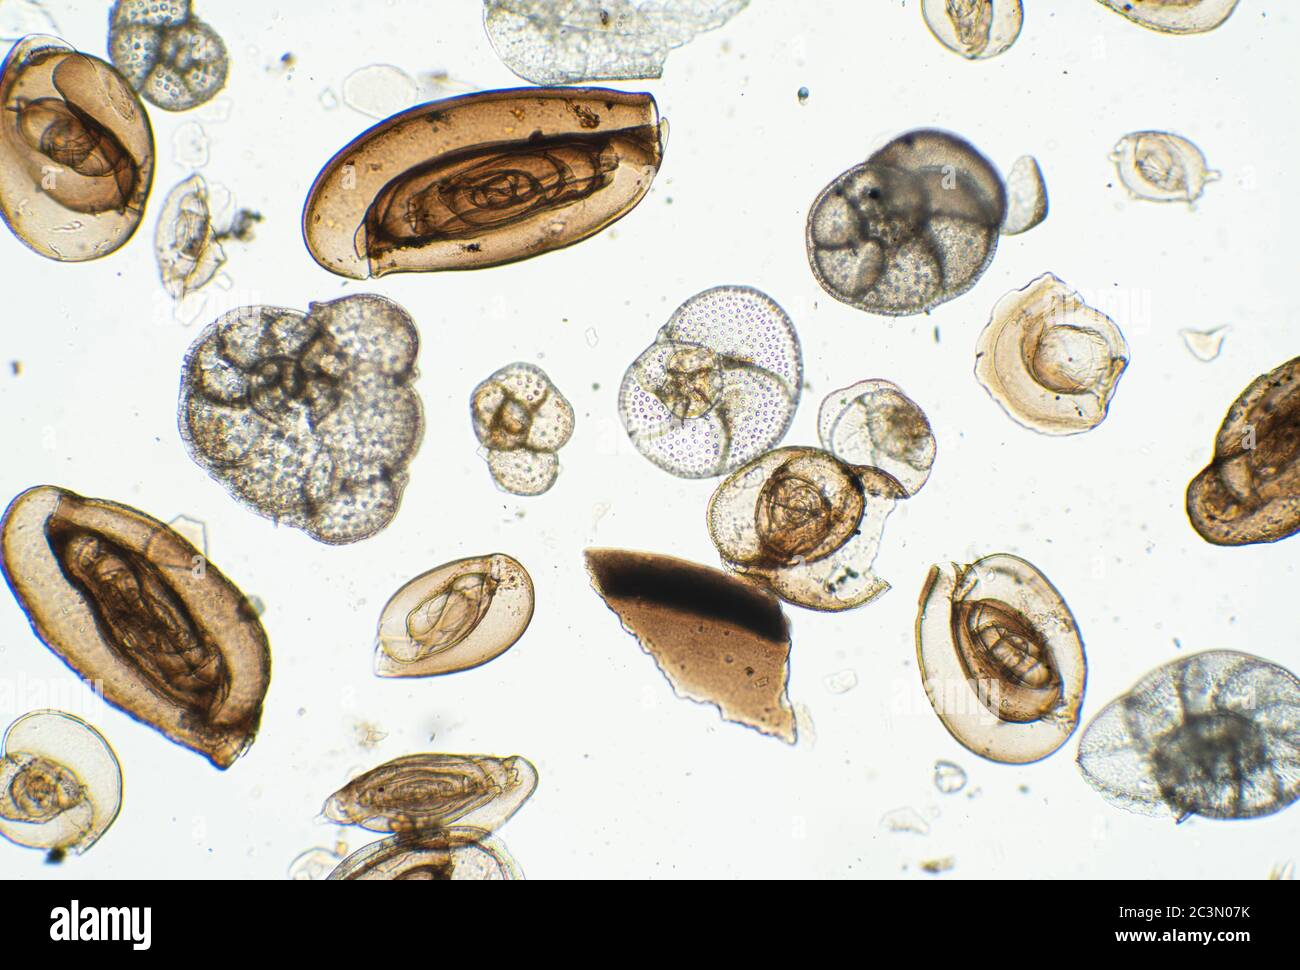 Foraminifera tests, amoeboid protists from Adriatic Sea, microscope view Stock Photo